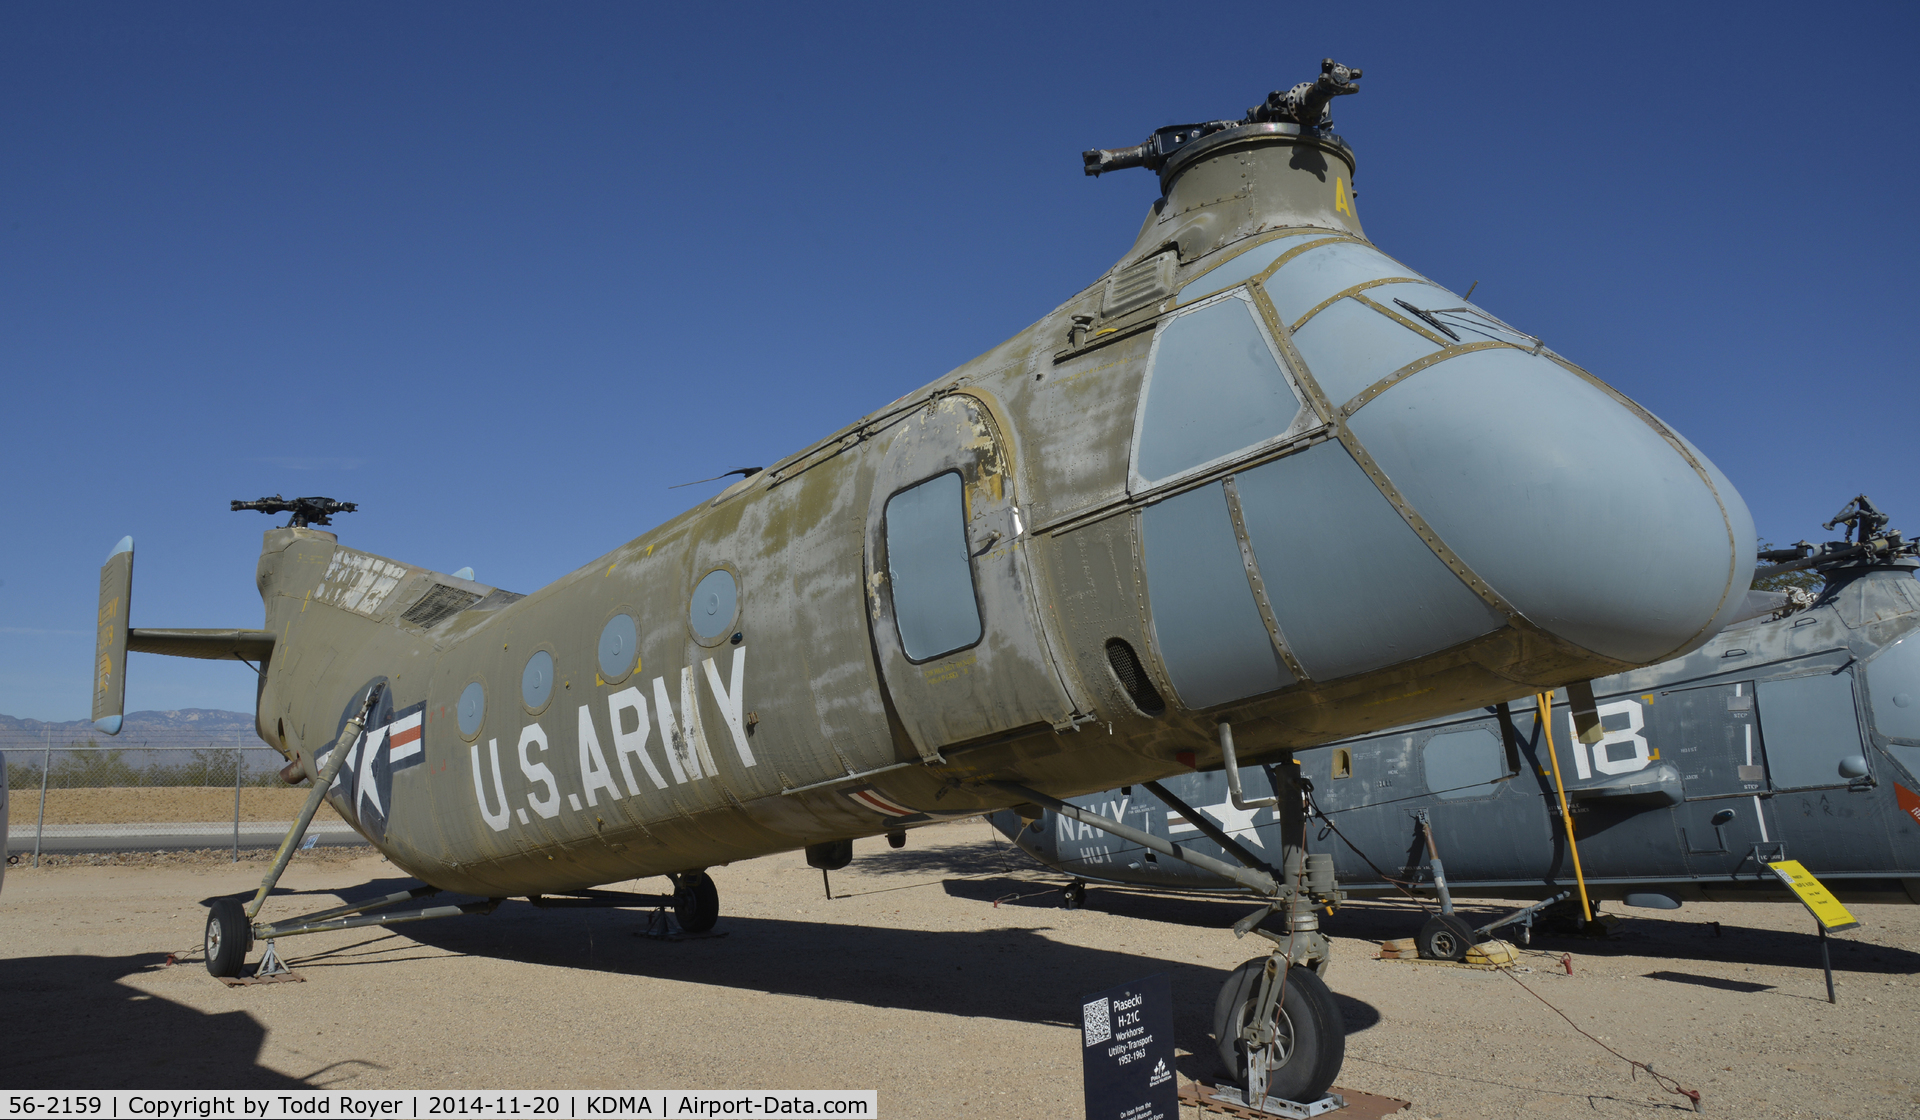 56-2159, 1956 Piasecki H-21C Shawnee C/N C.321, On Display at the Pima Air and Space Museum